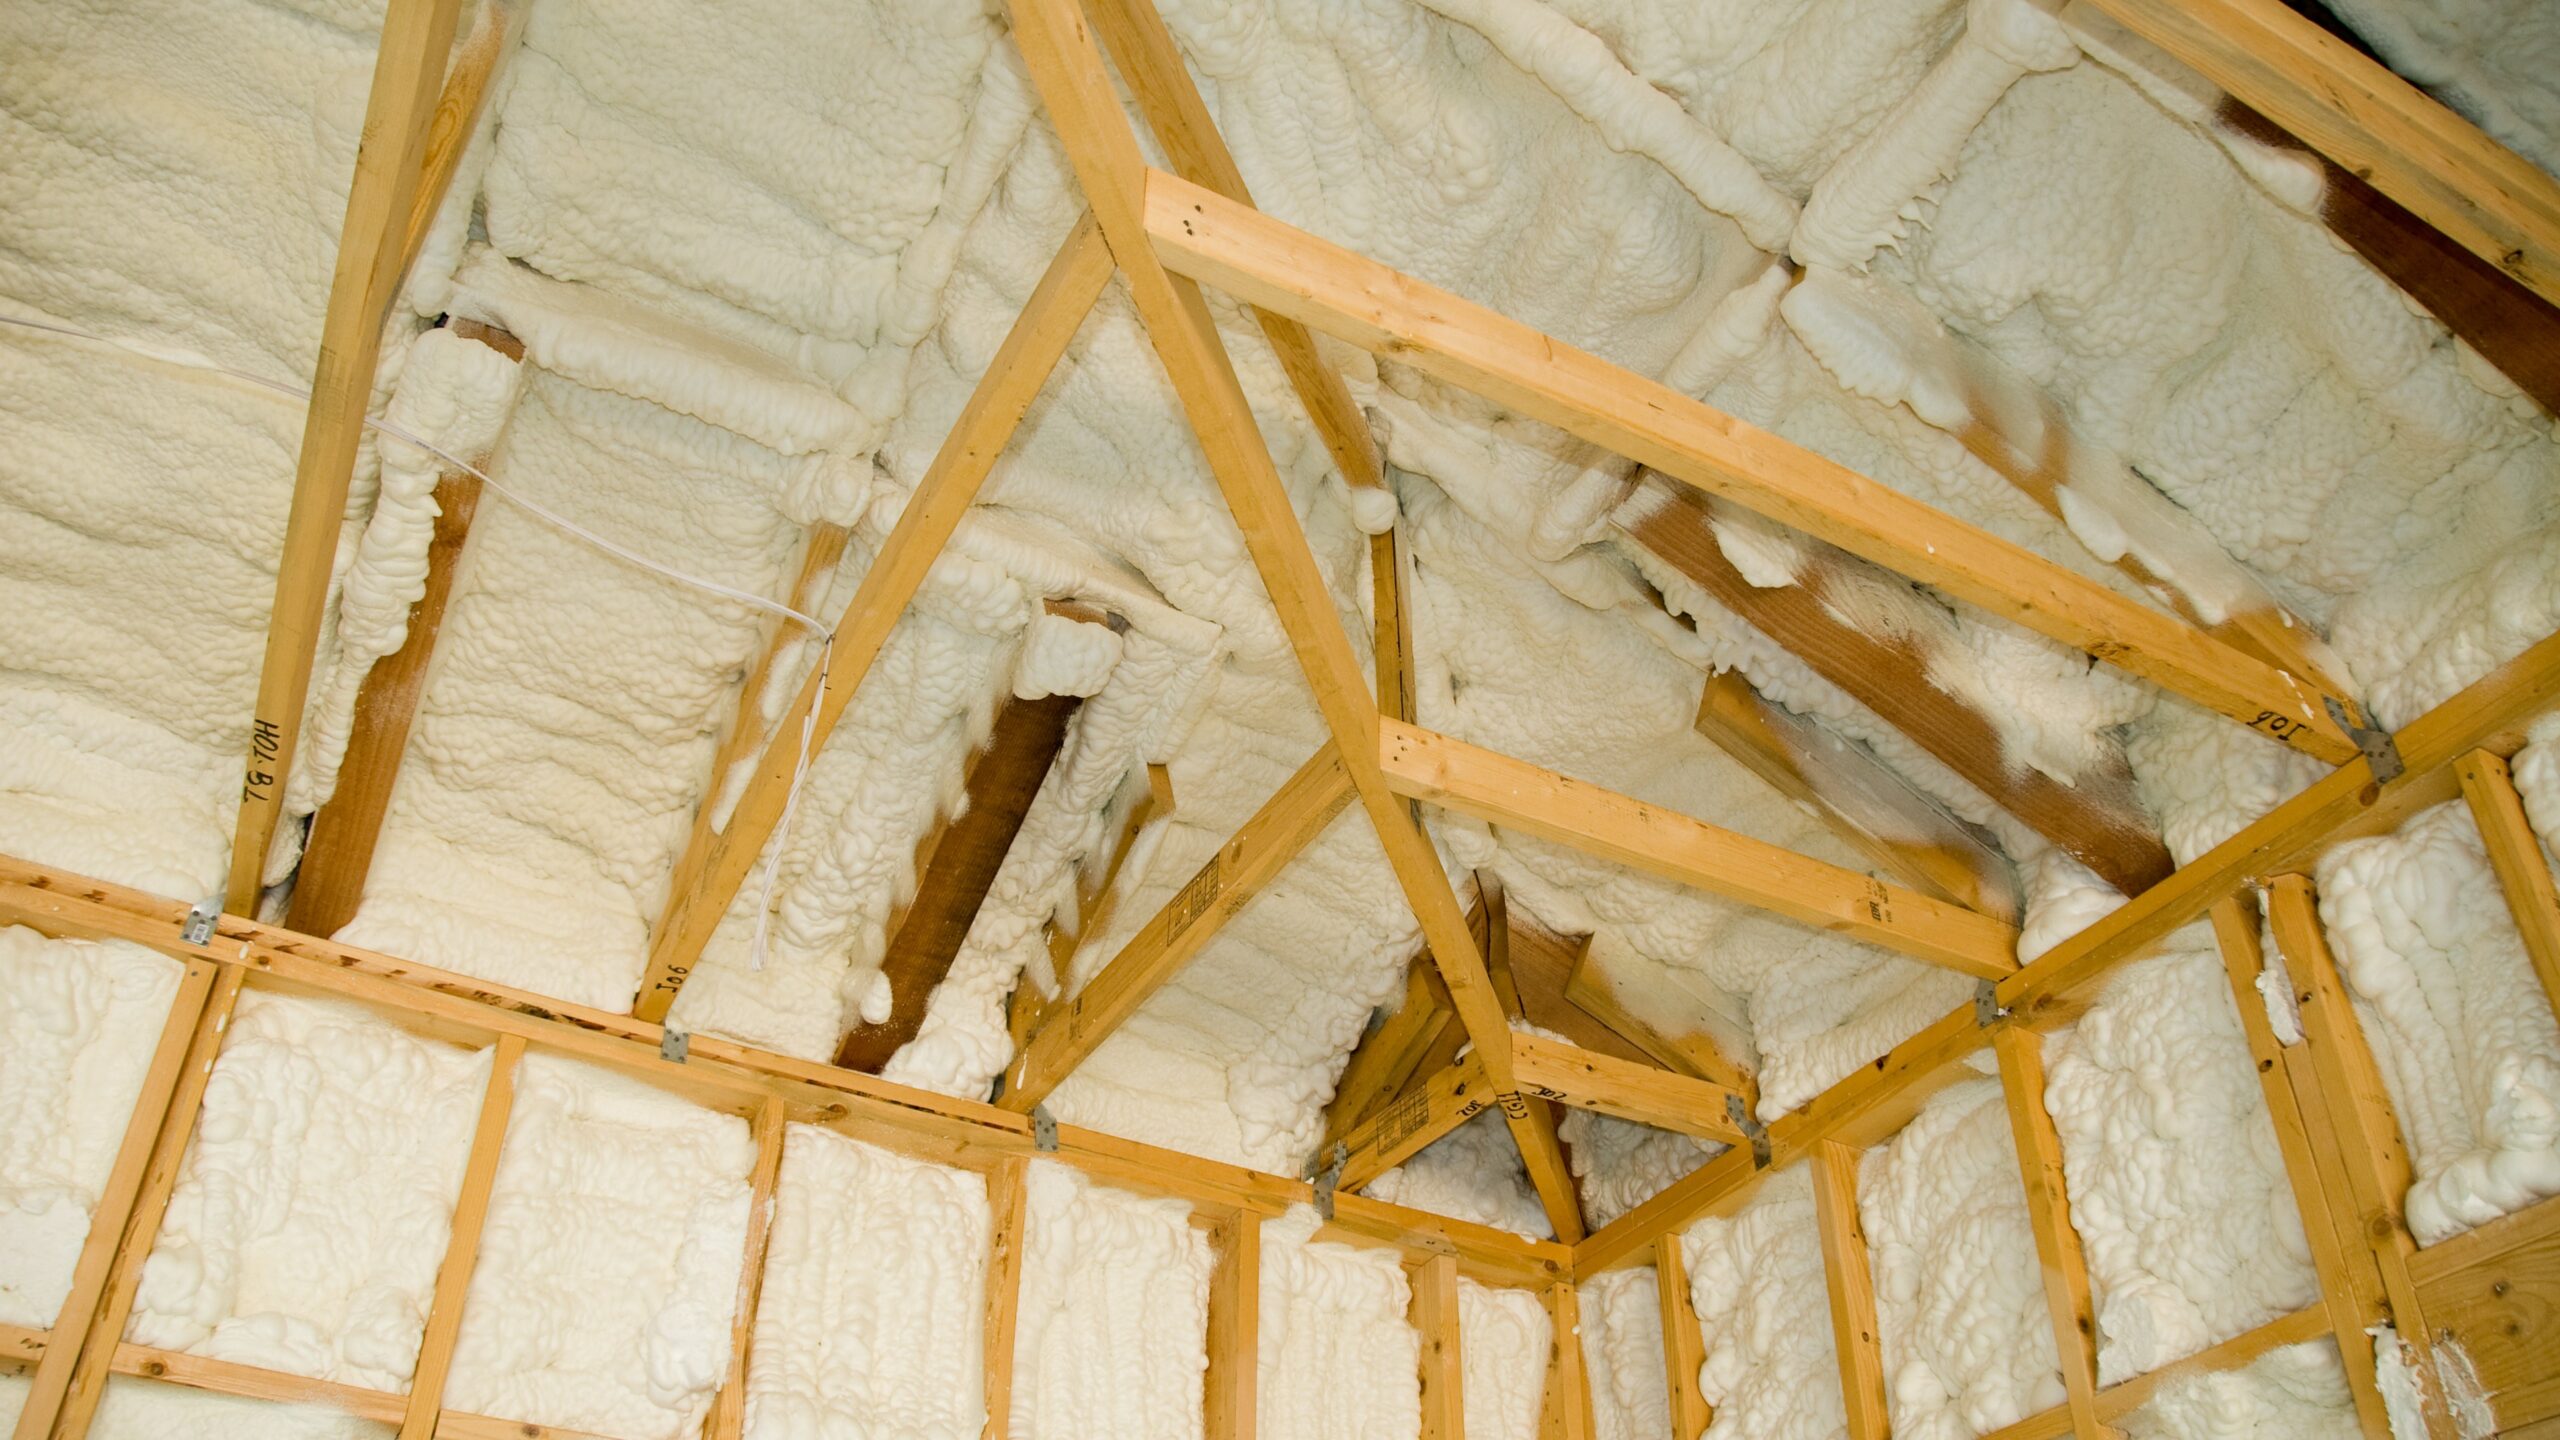 Completed spray foam insulation project.